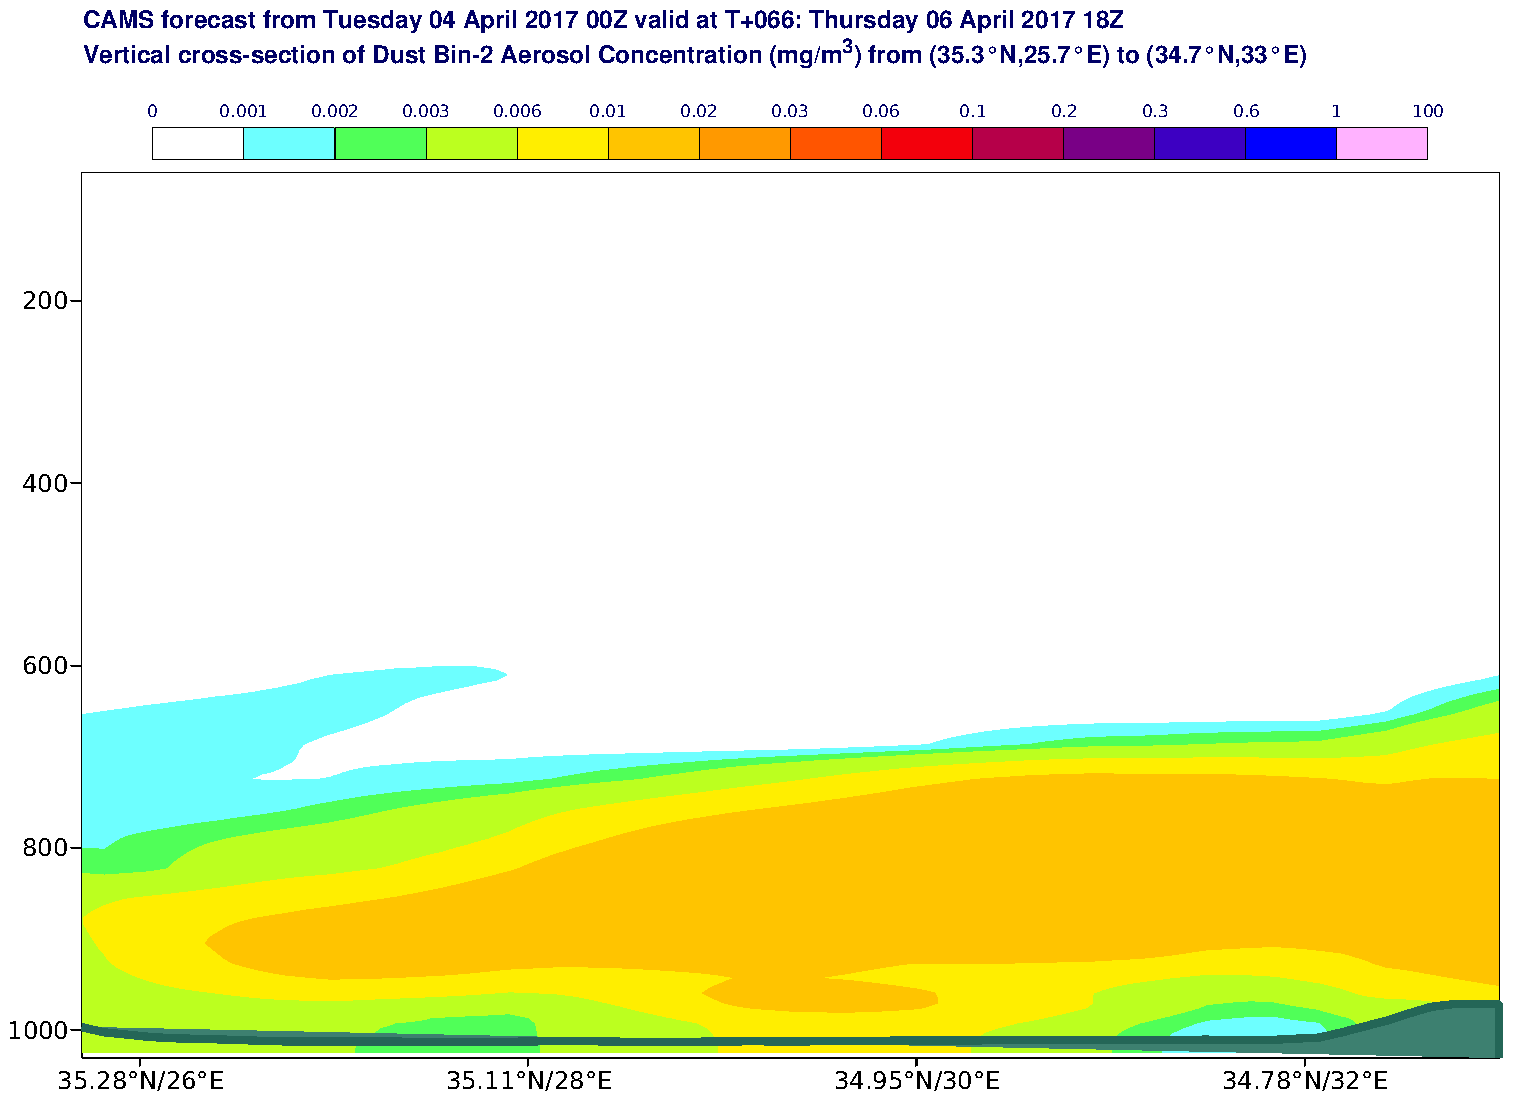 Vertical cross-section of Dust Bin-2 Aerosol Concentration (mg/m3) valid at T66 - 2017-04-06 18:00